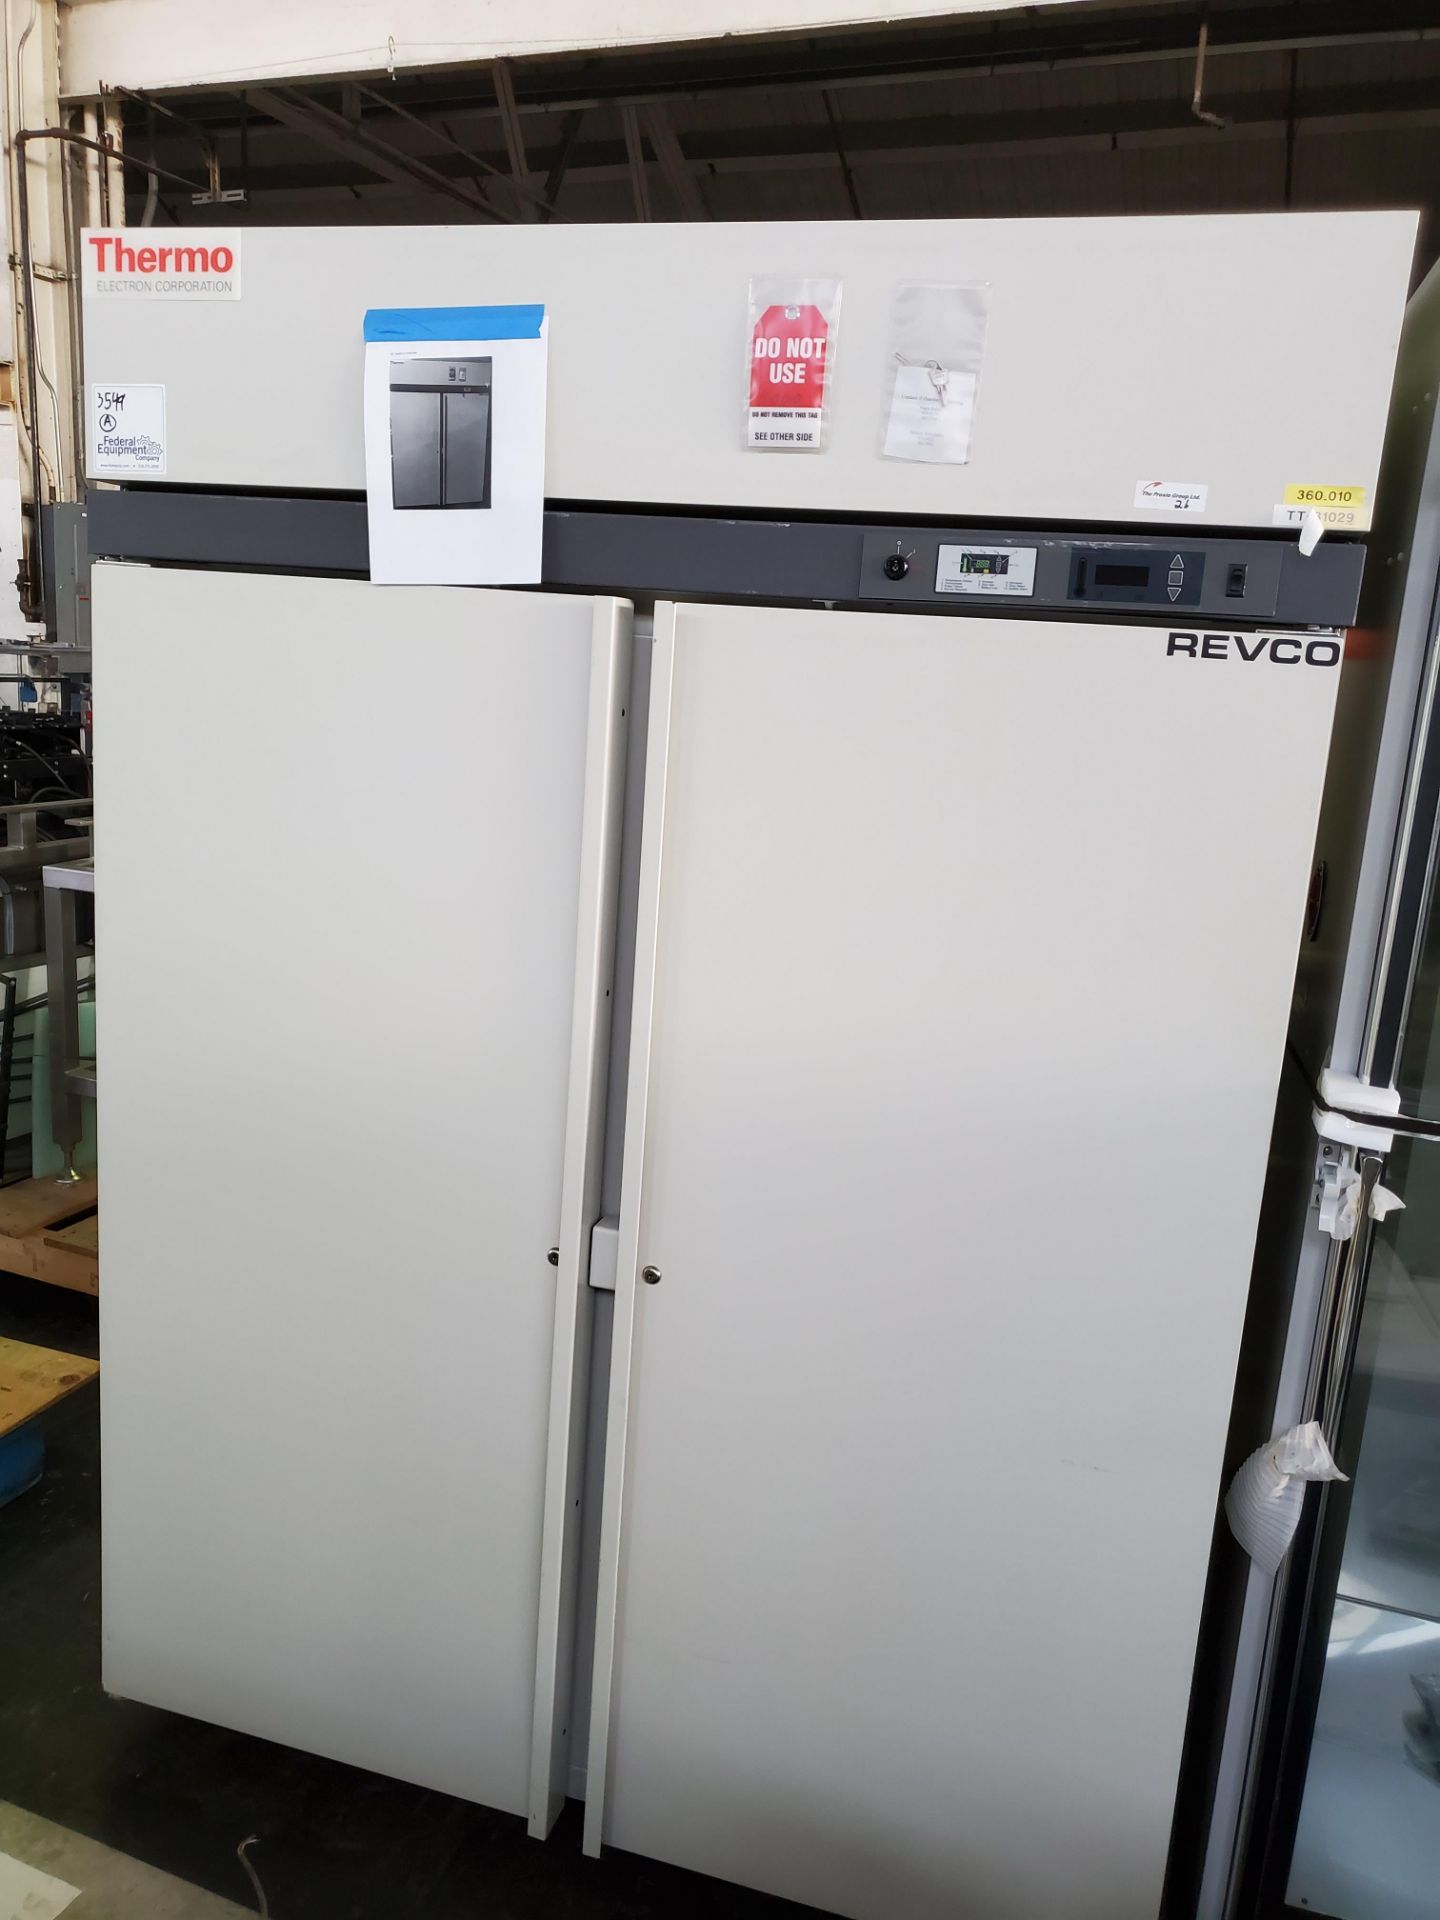 Revco/Thermo Electron Freezer, model REL5004A21, 53" wide x 25"deep x 53" high chamber, R134a - Image 2 of 7